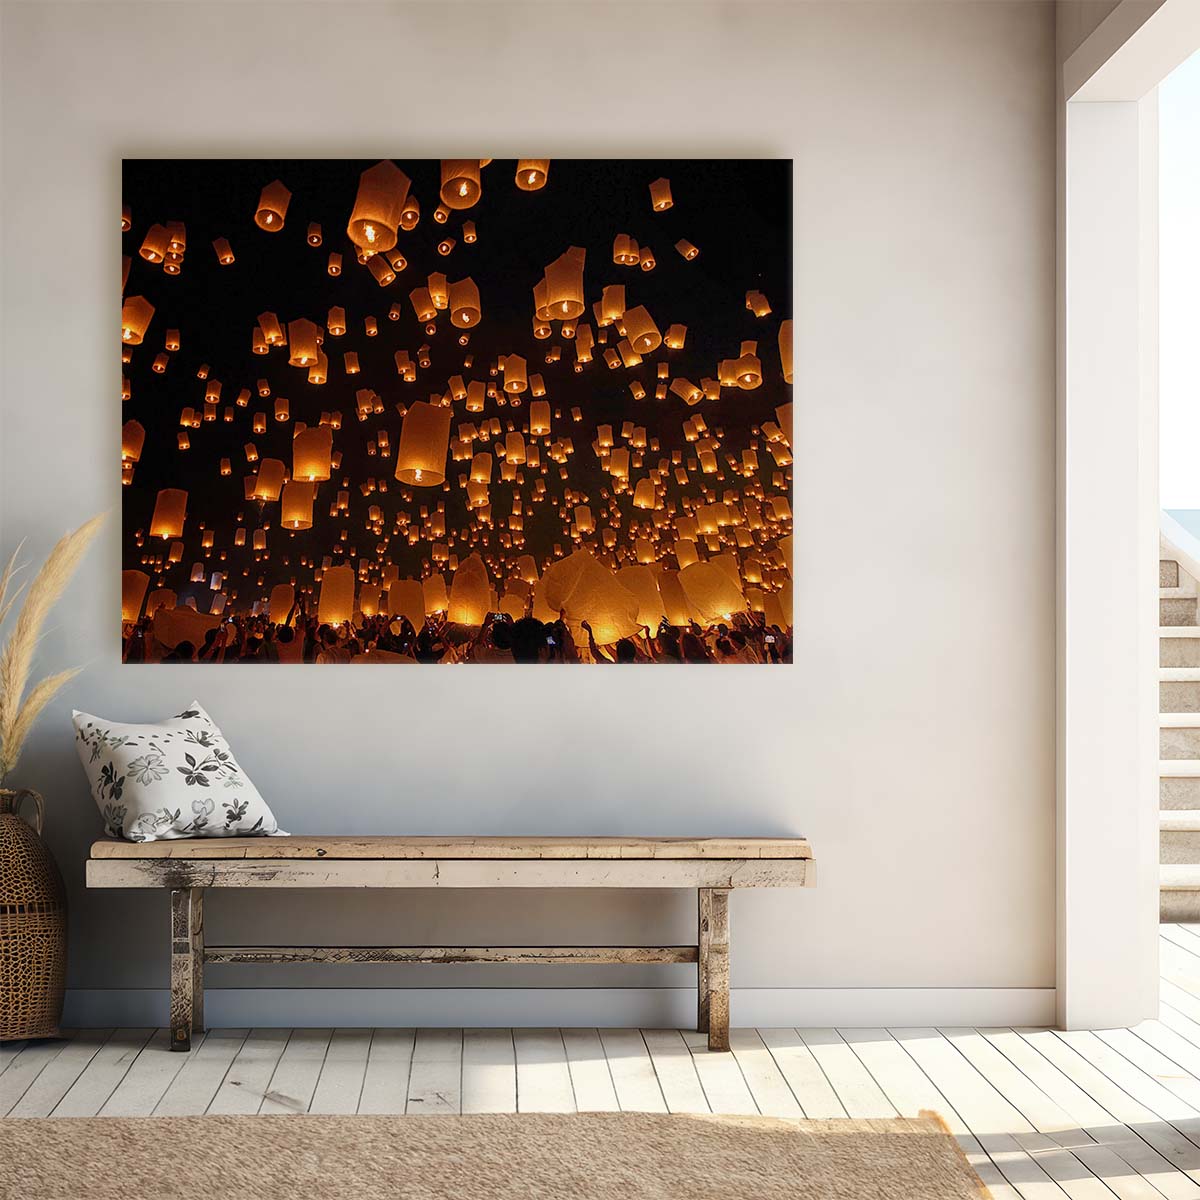 Golden Floating Lanterns Festival Night Wall Art by Luxuriance Designs. Made in USA.